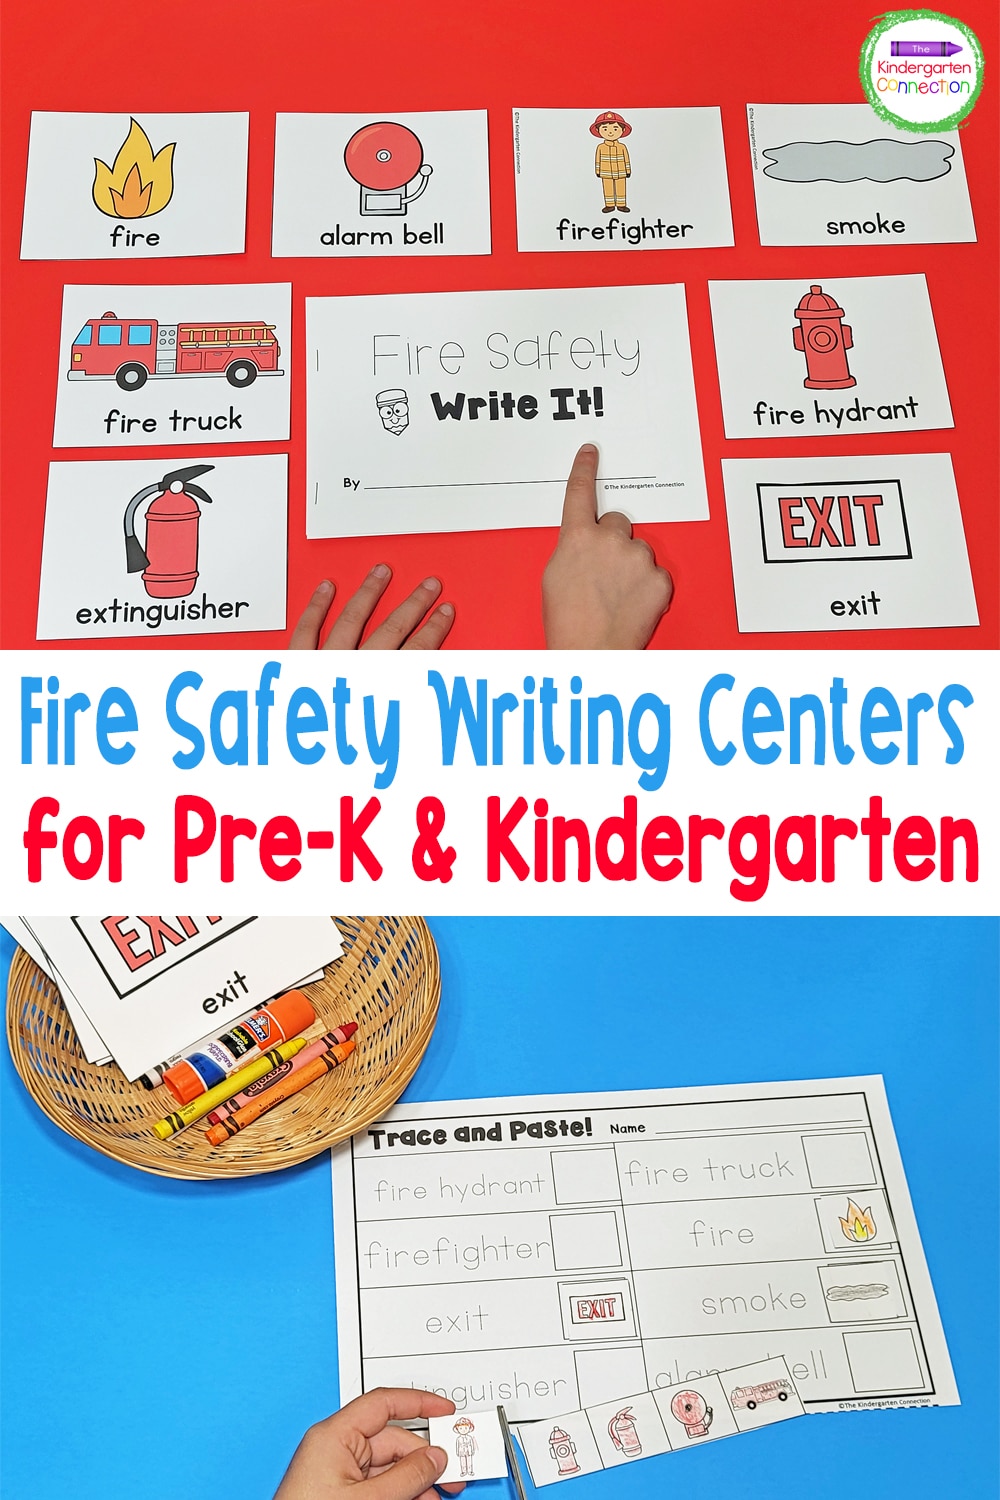 These Fire Safety Writing Activities for Pre-K & Kindergarten are perfect for early writers to practice labeling, sentence writing, and more!